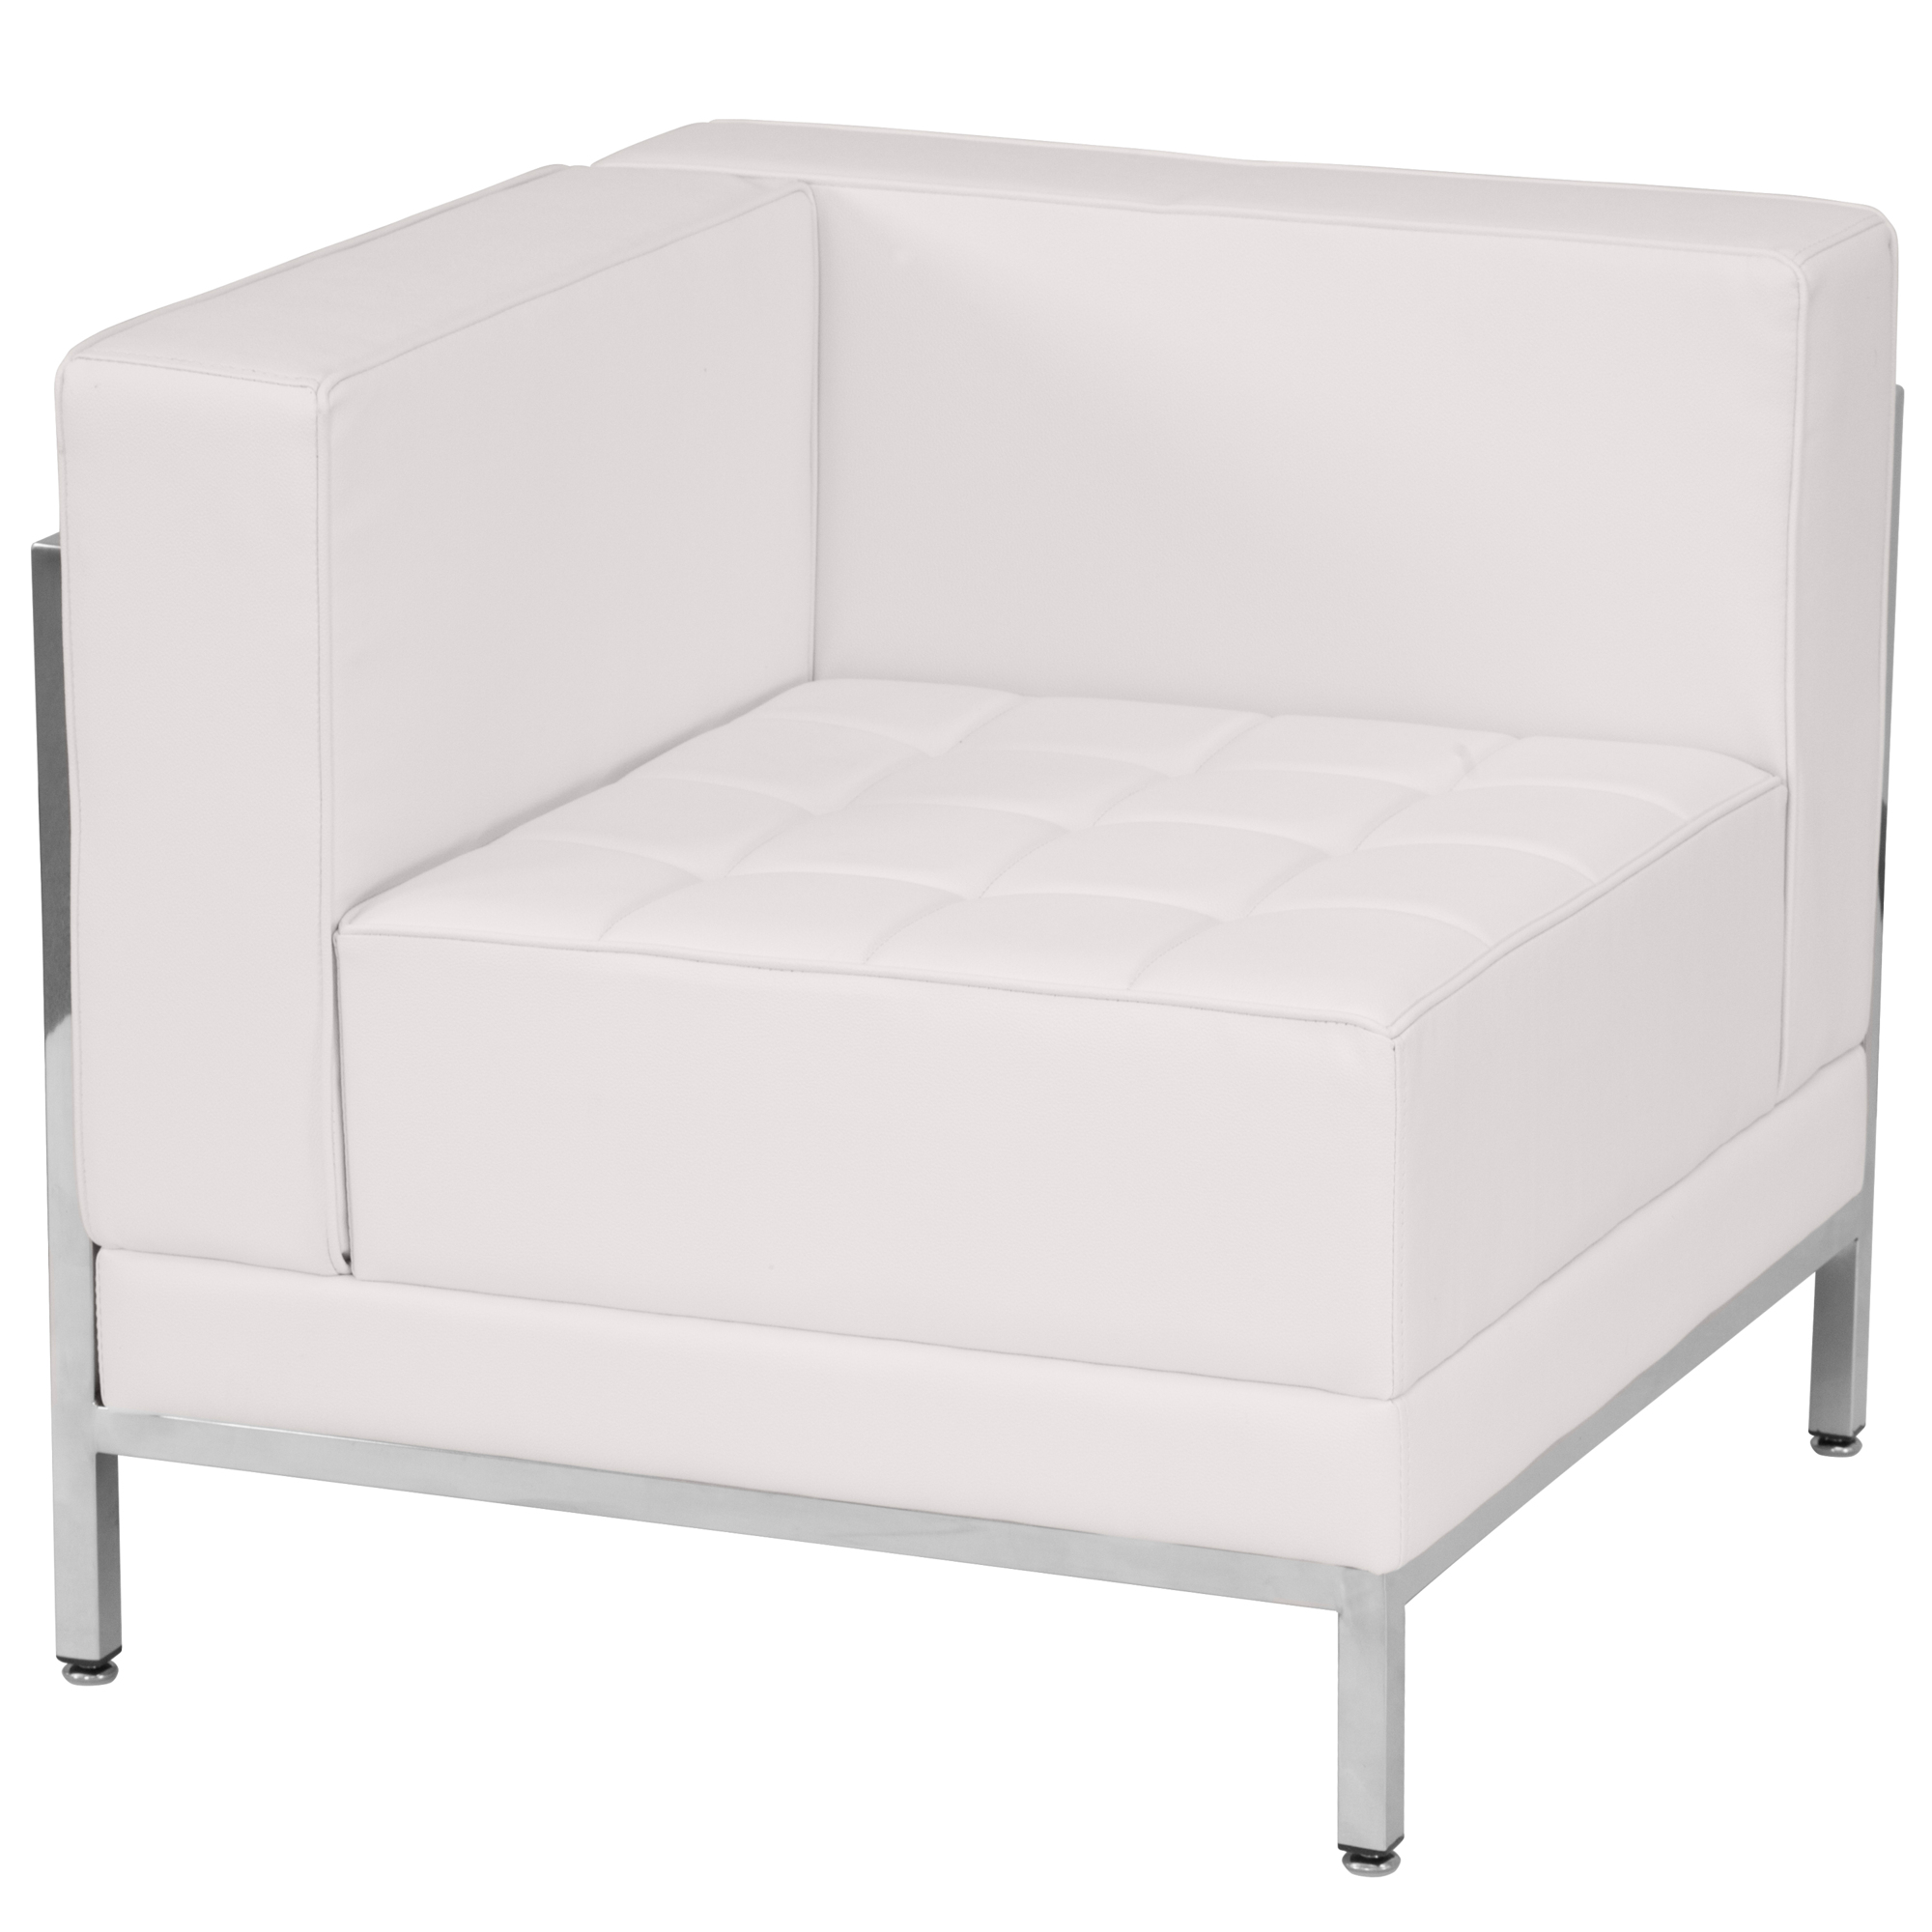 Flash Furniture, White LeatherSoft Modular Left Corner Chair, Primary Color White, Included (qty.) 1, Model ZBIMAGLFTCNRWH